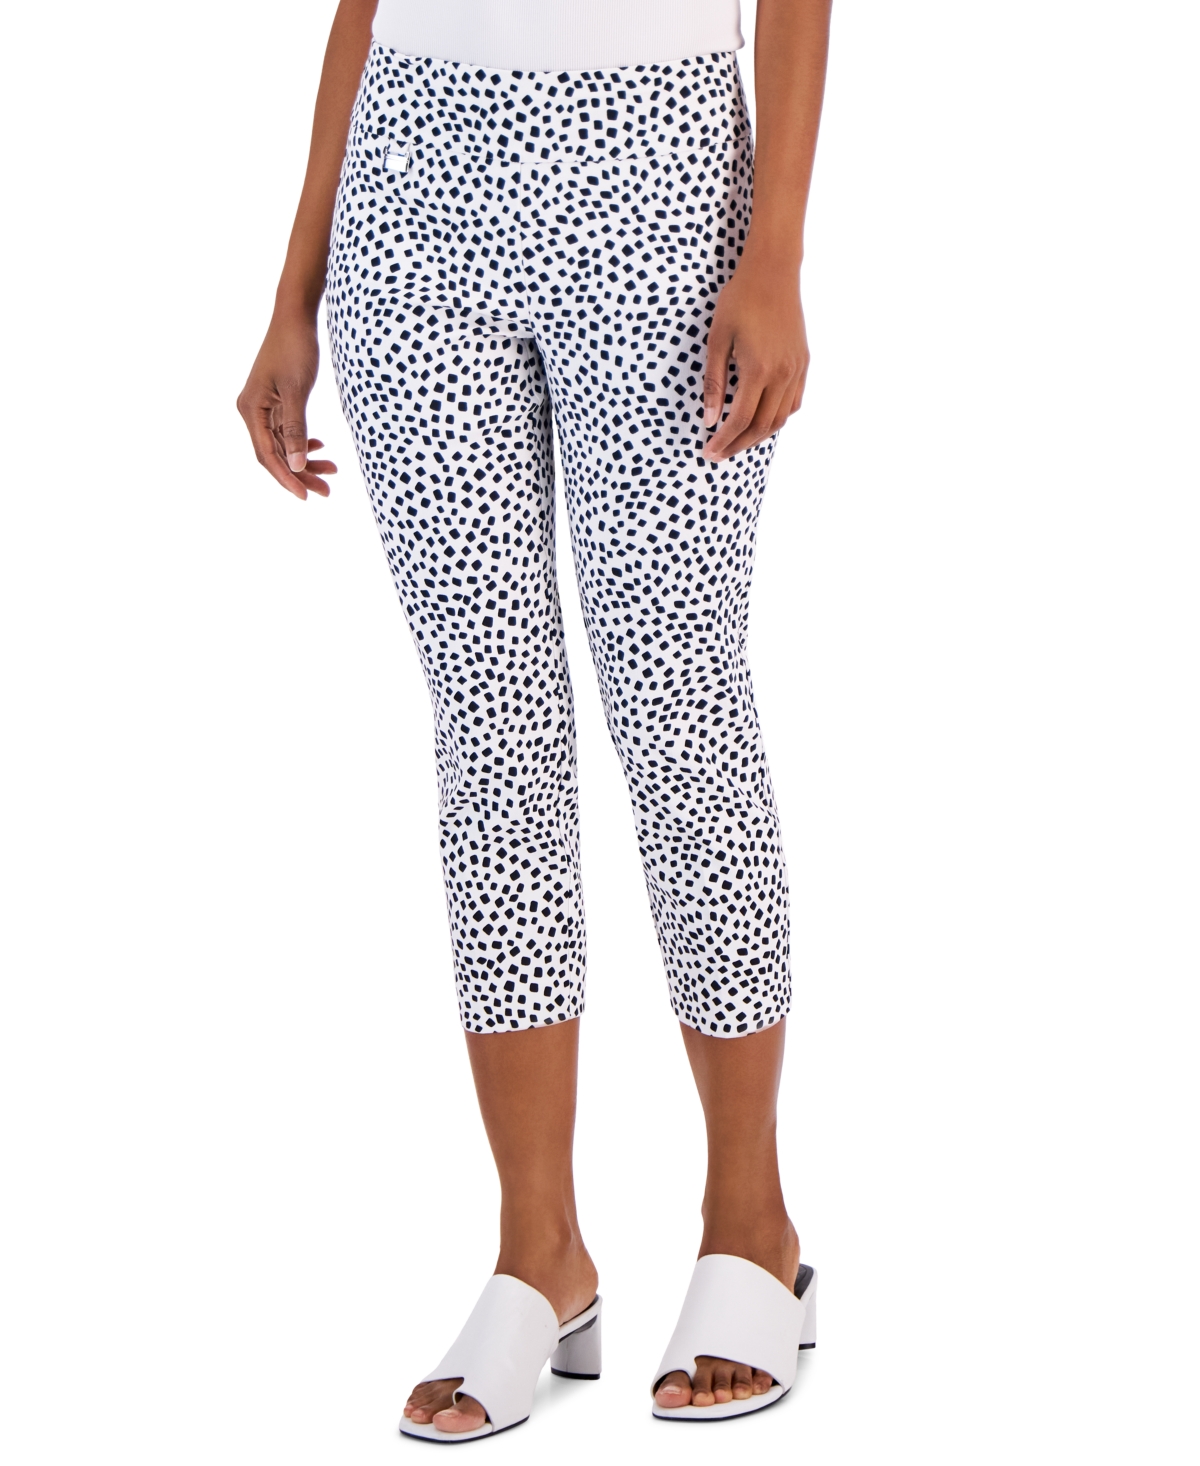  Alfani Essential Printed Capri Pull-On with Tummy-Control, Created for Macy's